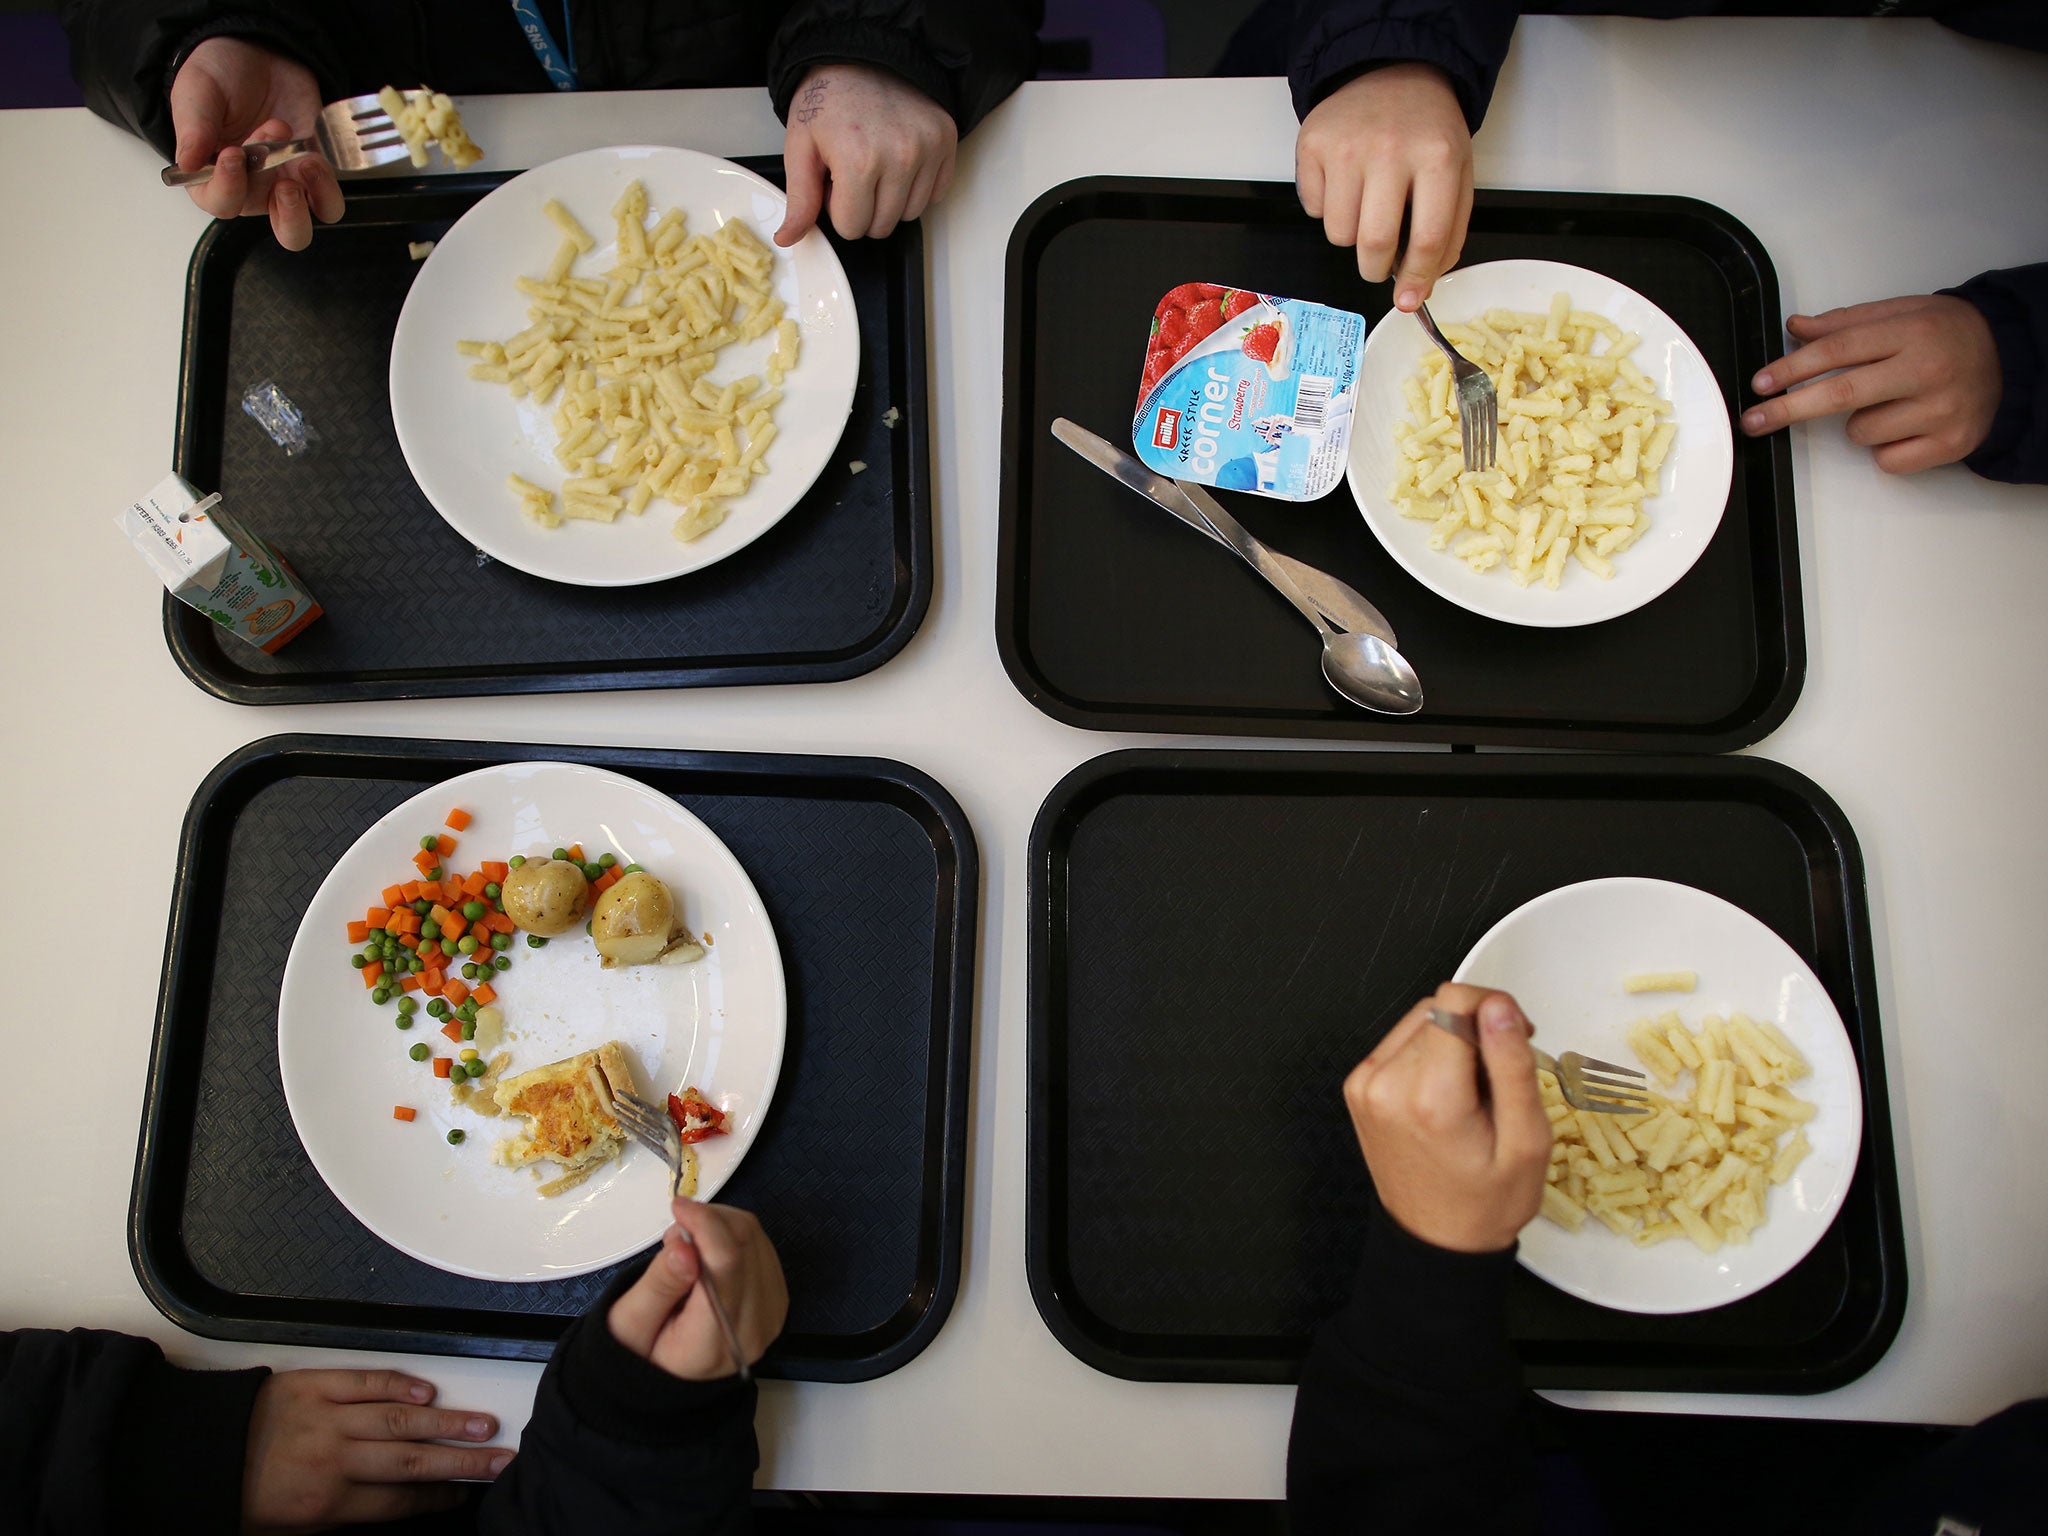 The company serves up more than 100,000 school dinners each day